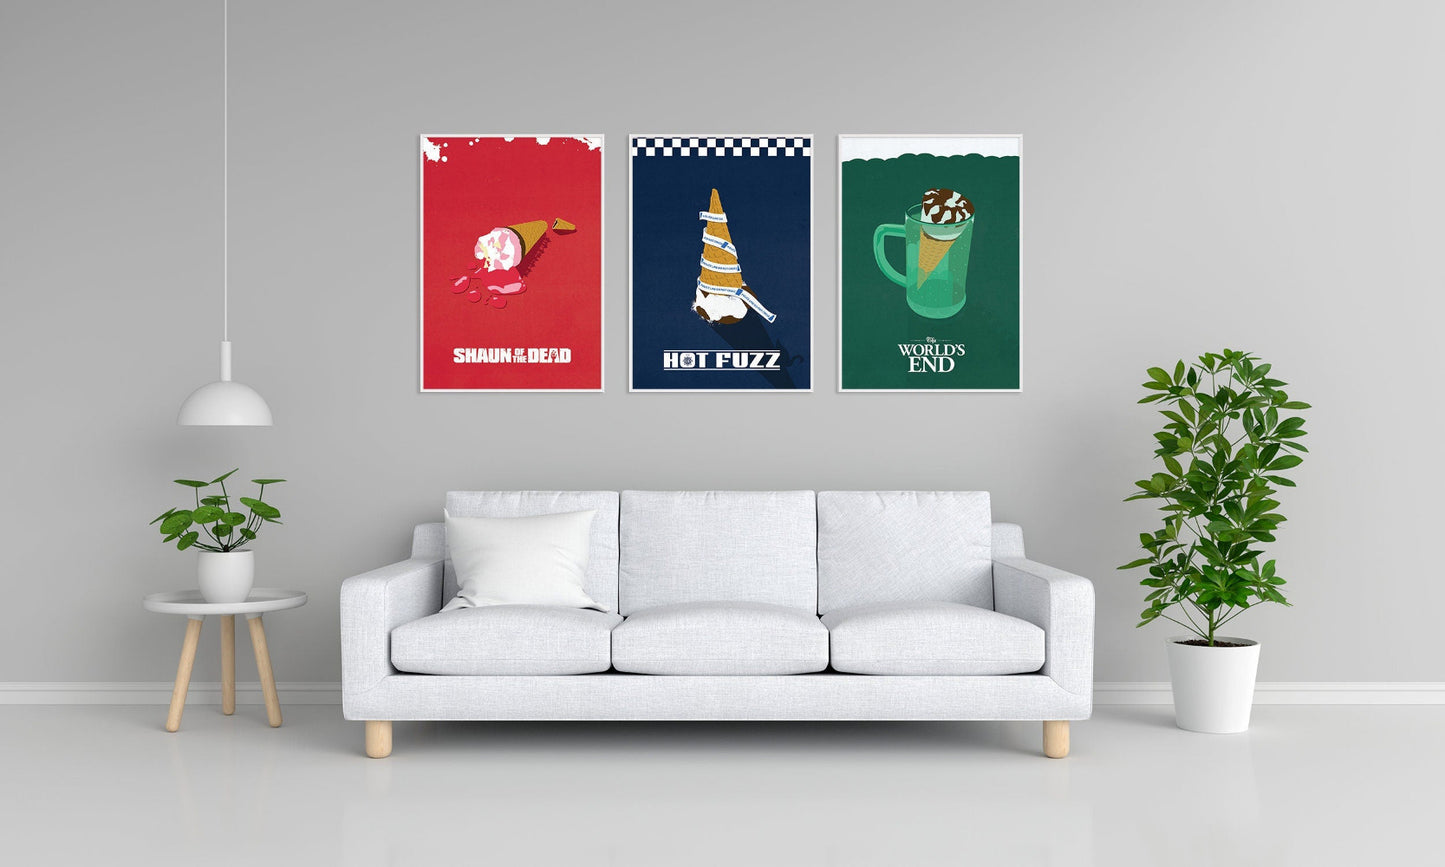 The Cornetto Trilogy Posters | Shaun Of The Dead, Hot Fuzz and The World's End Prints | Minimalist Movie Posters | 3 Cornetto Flavours